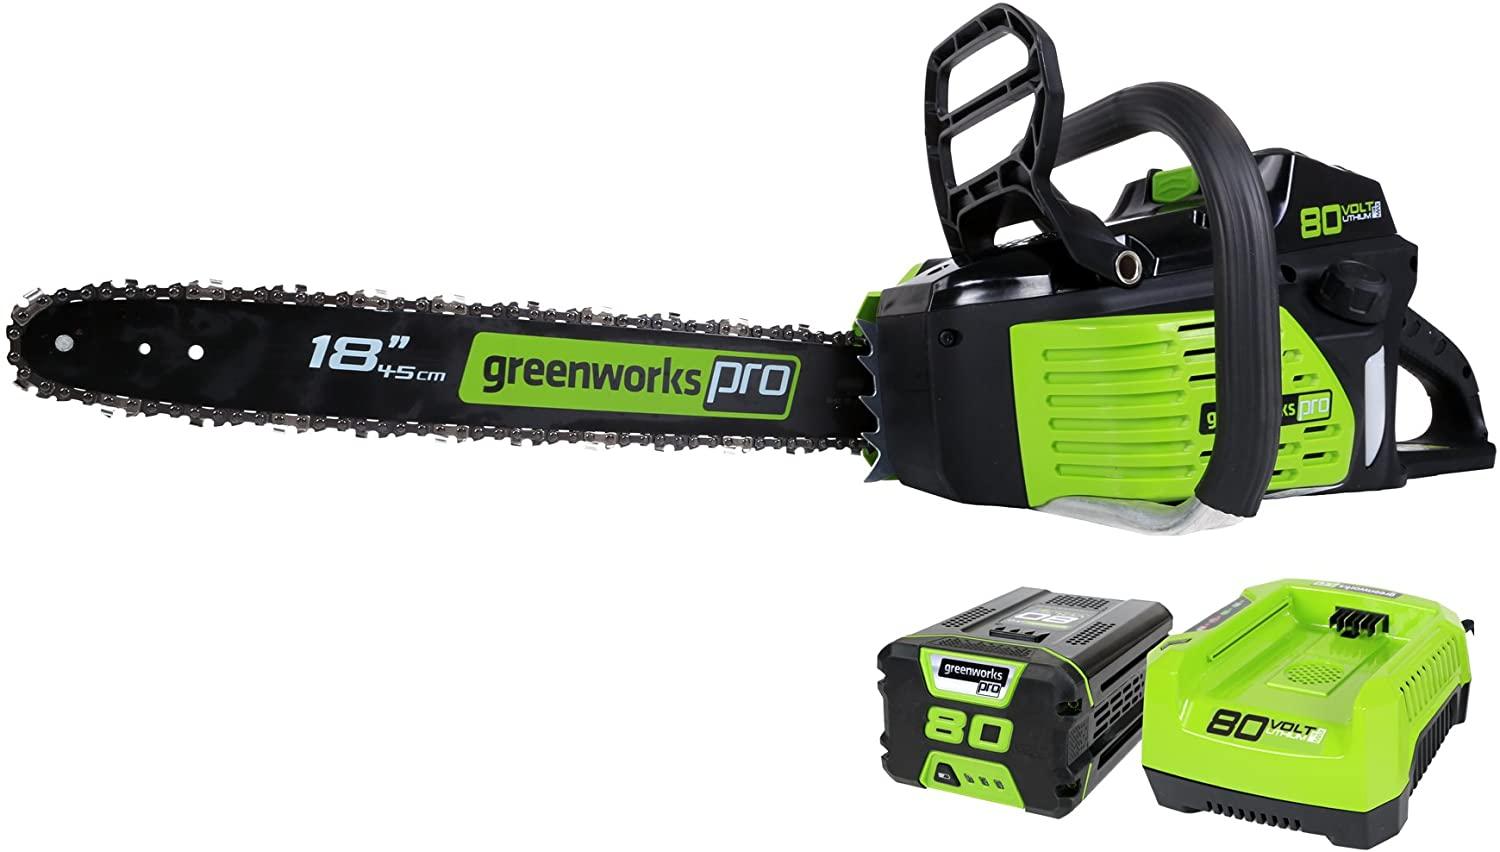 Greenworks Pro 80V 18in Cordless Chainsaw for $204.99 Shipped